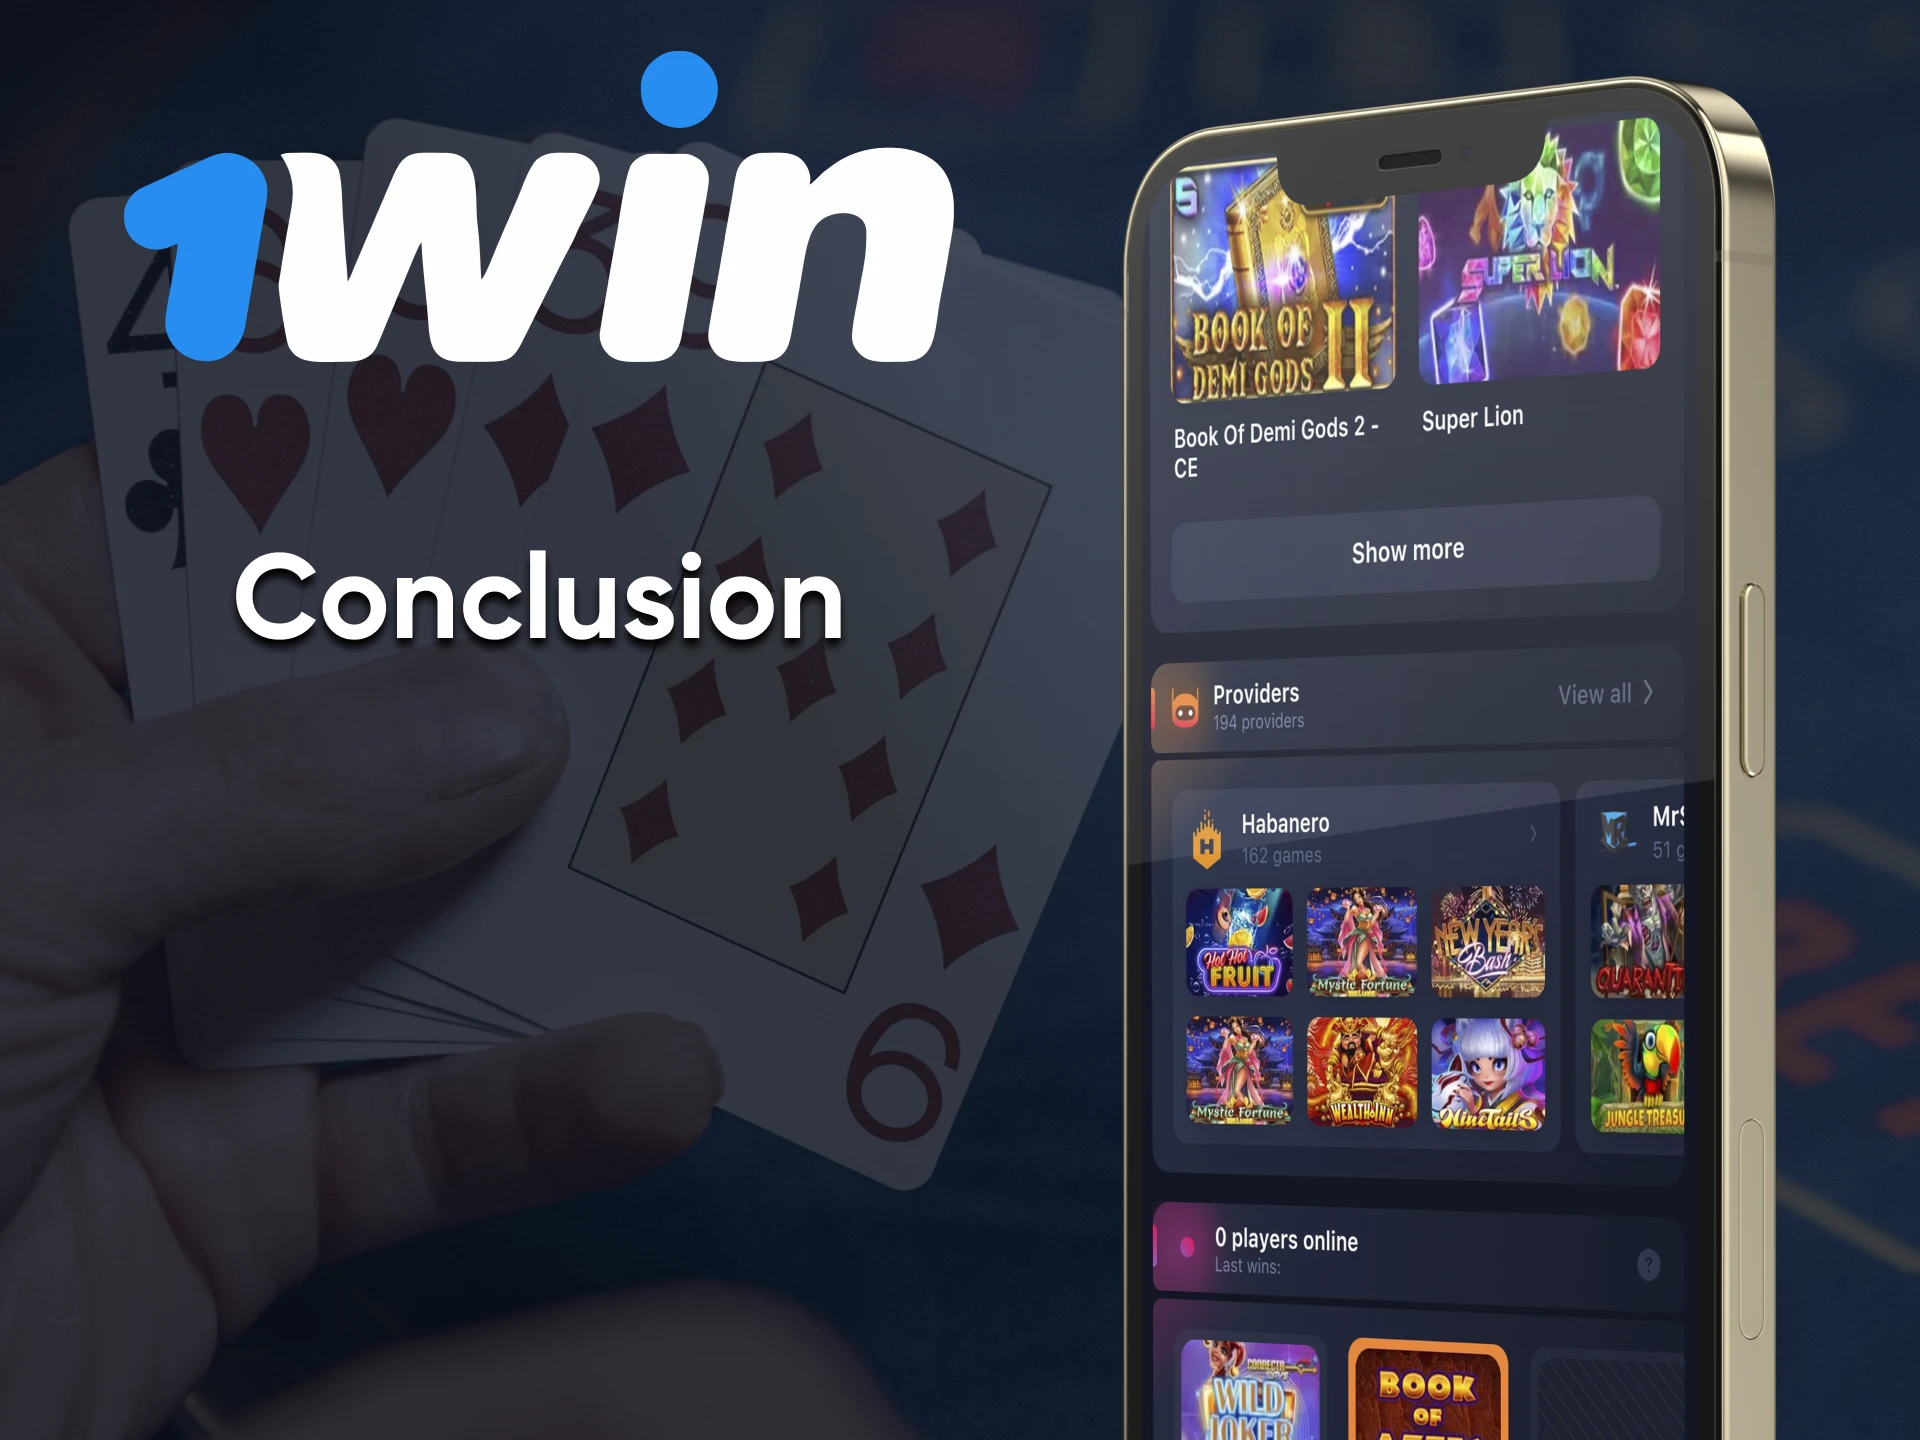 1win is the right decision when choosing casino games.